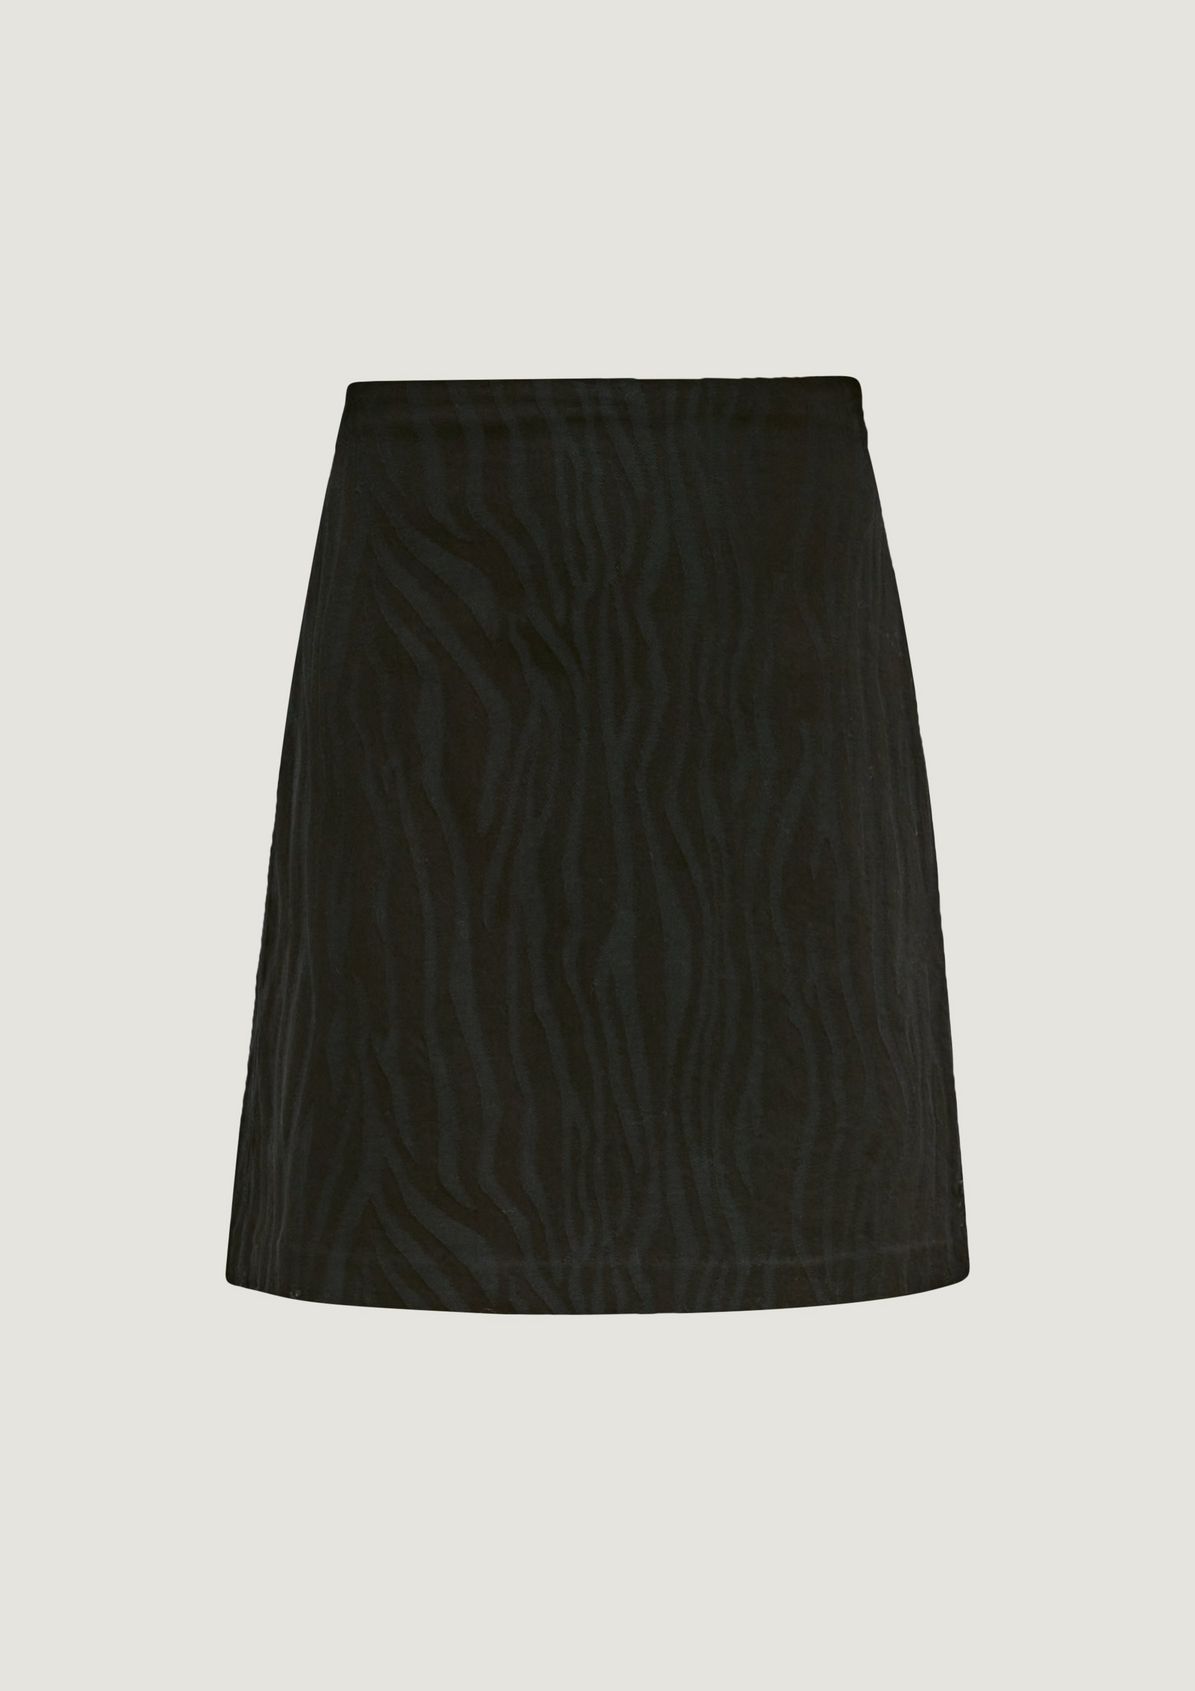 Denim skirt with an animal pattern from comma